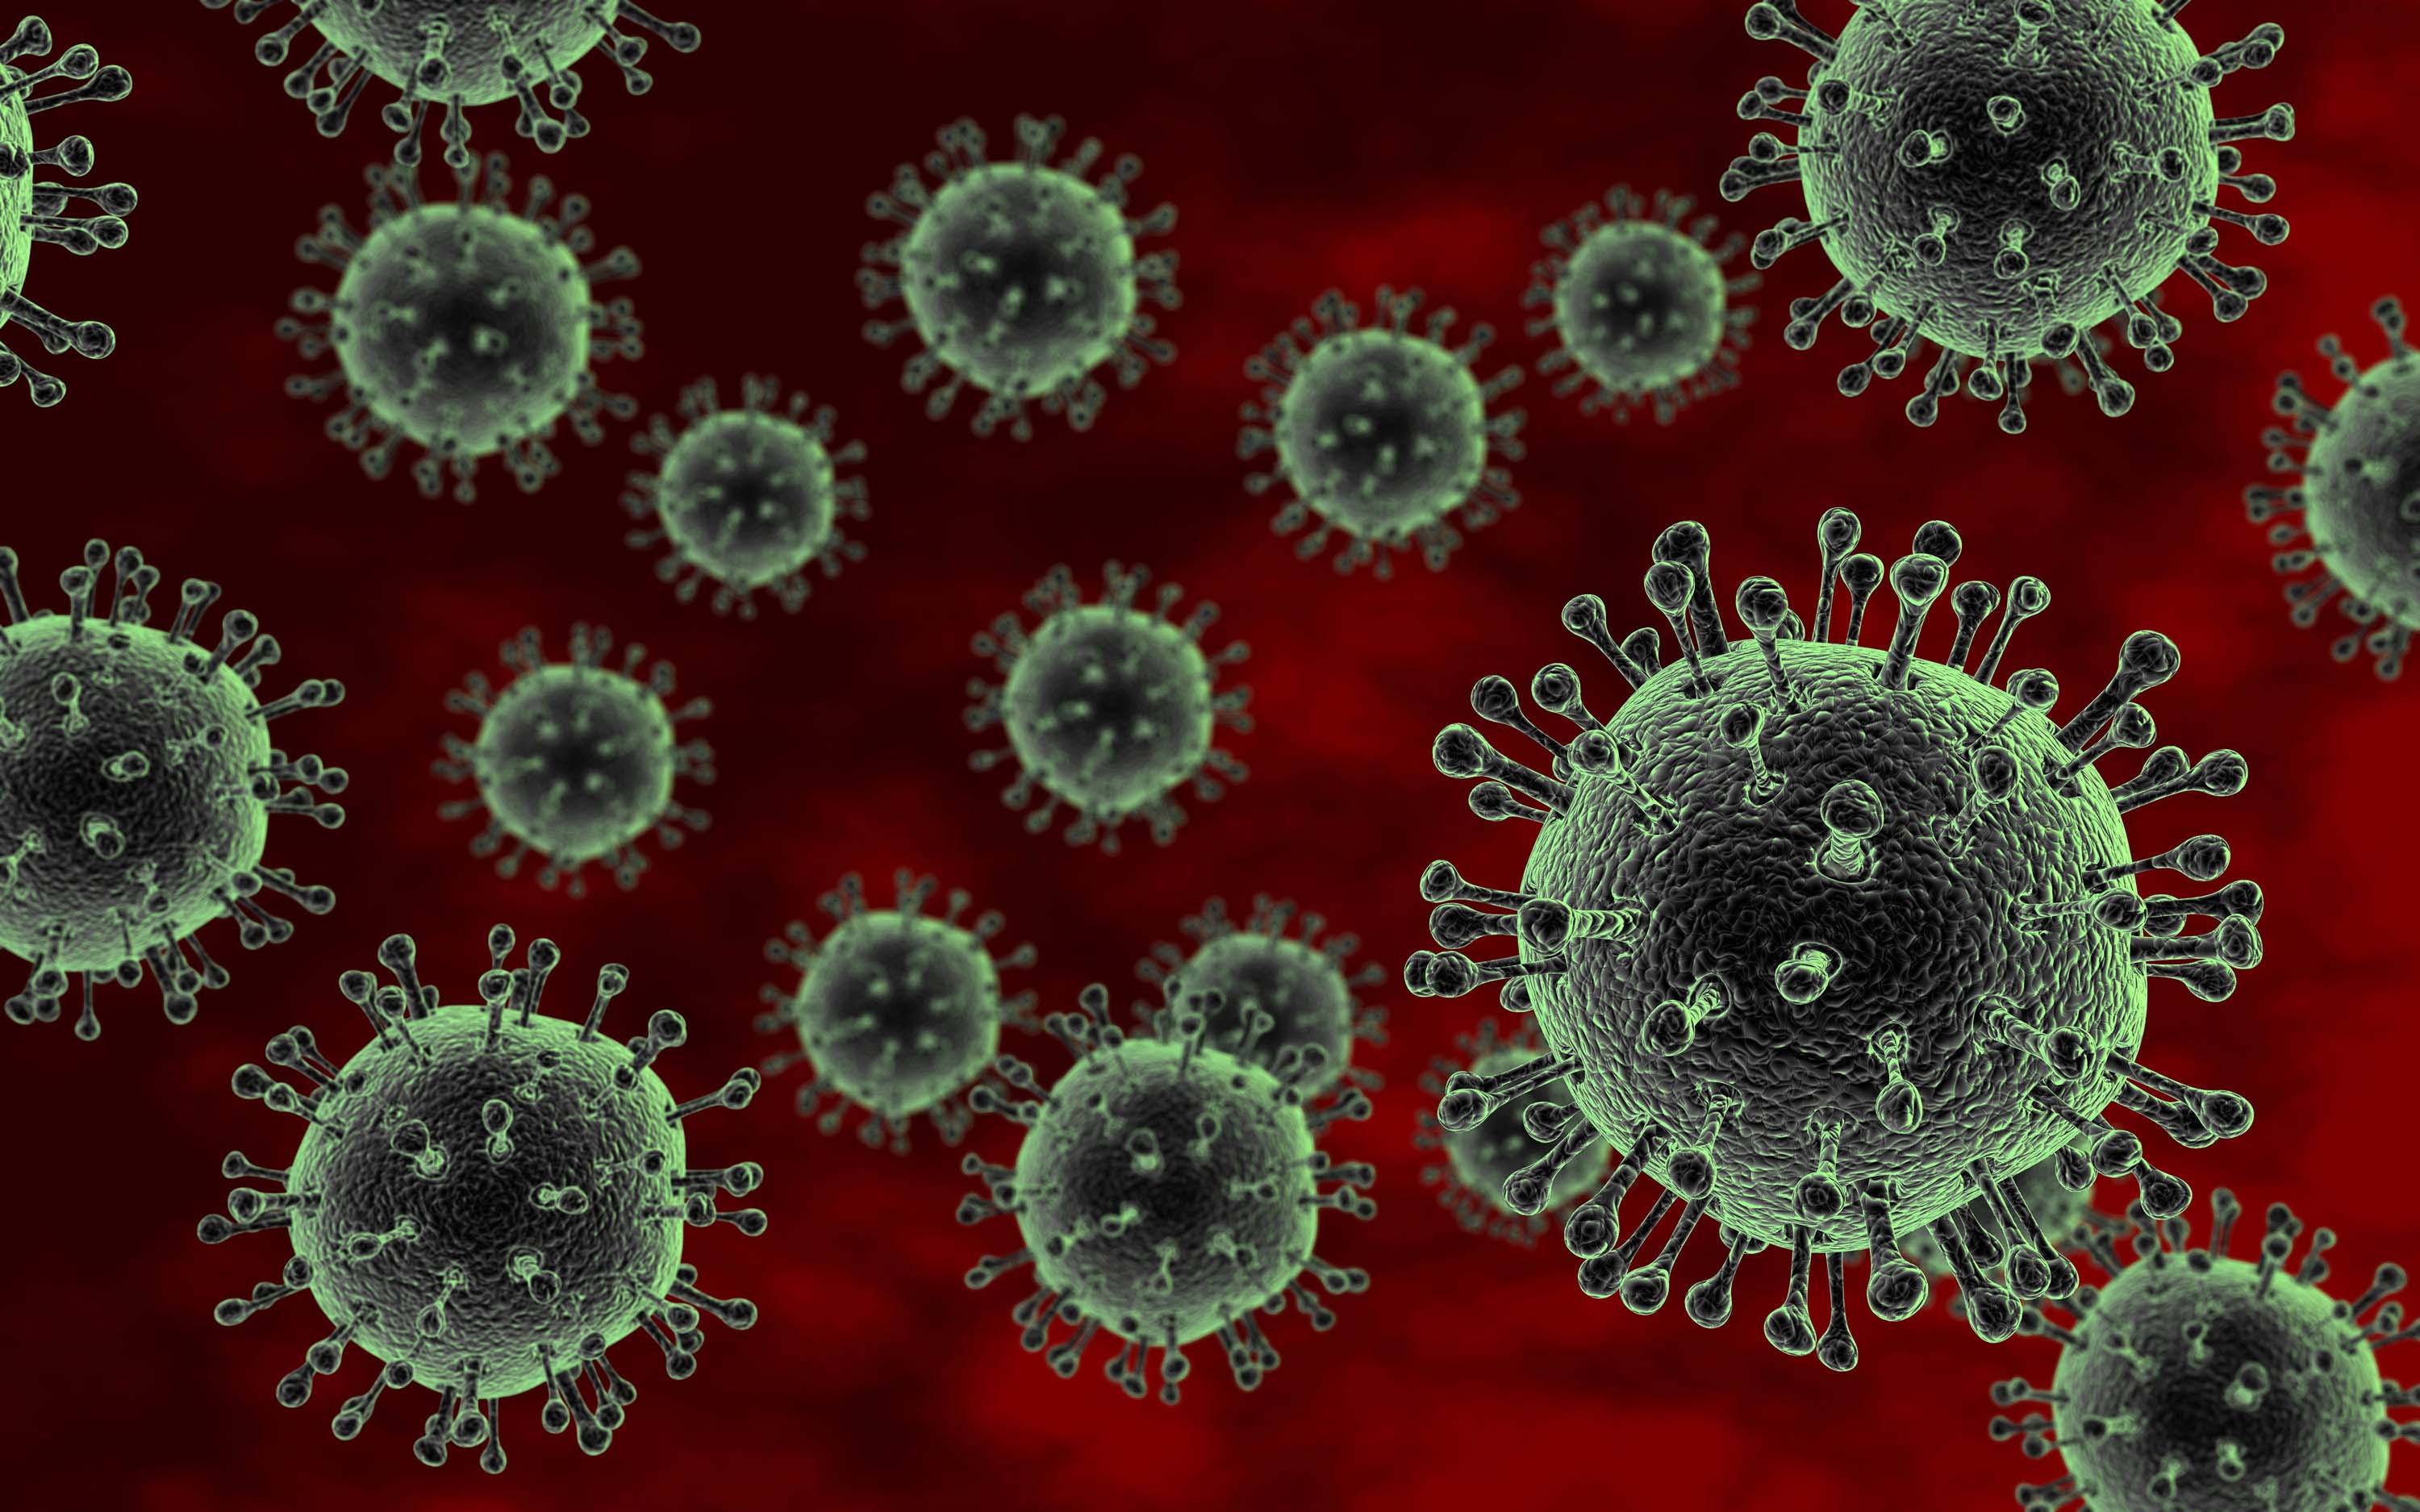 Next Pandemic? The H5N1 Bird Flu Virus Could Mutate To Induce Deadly